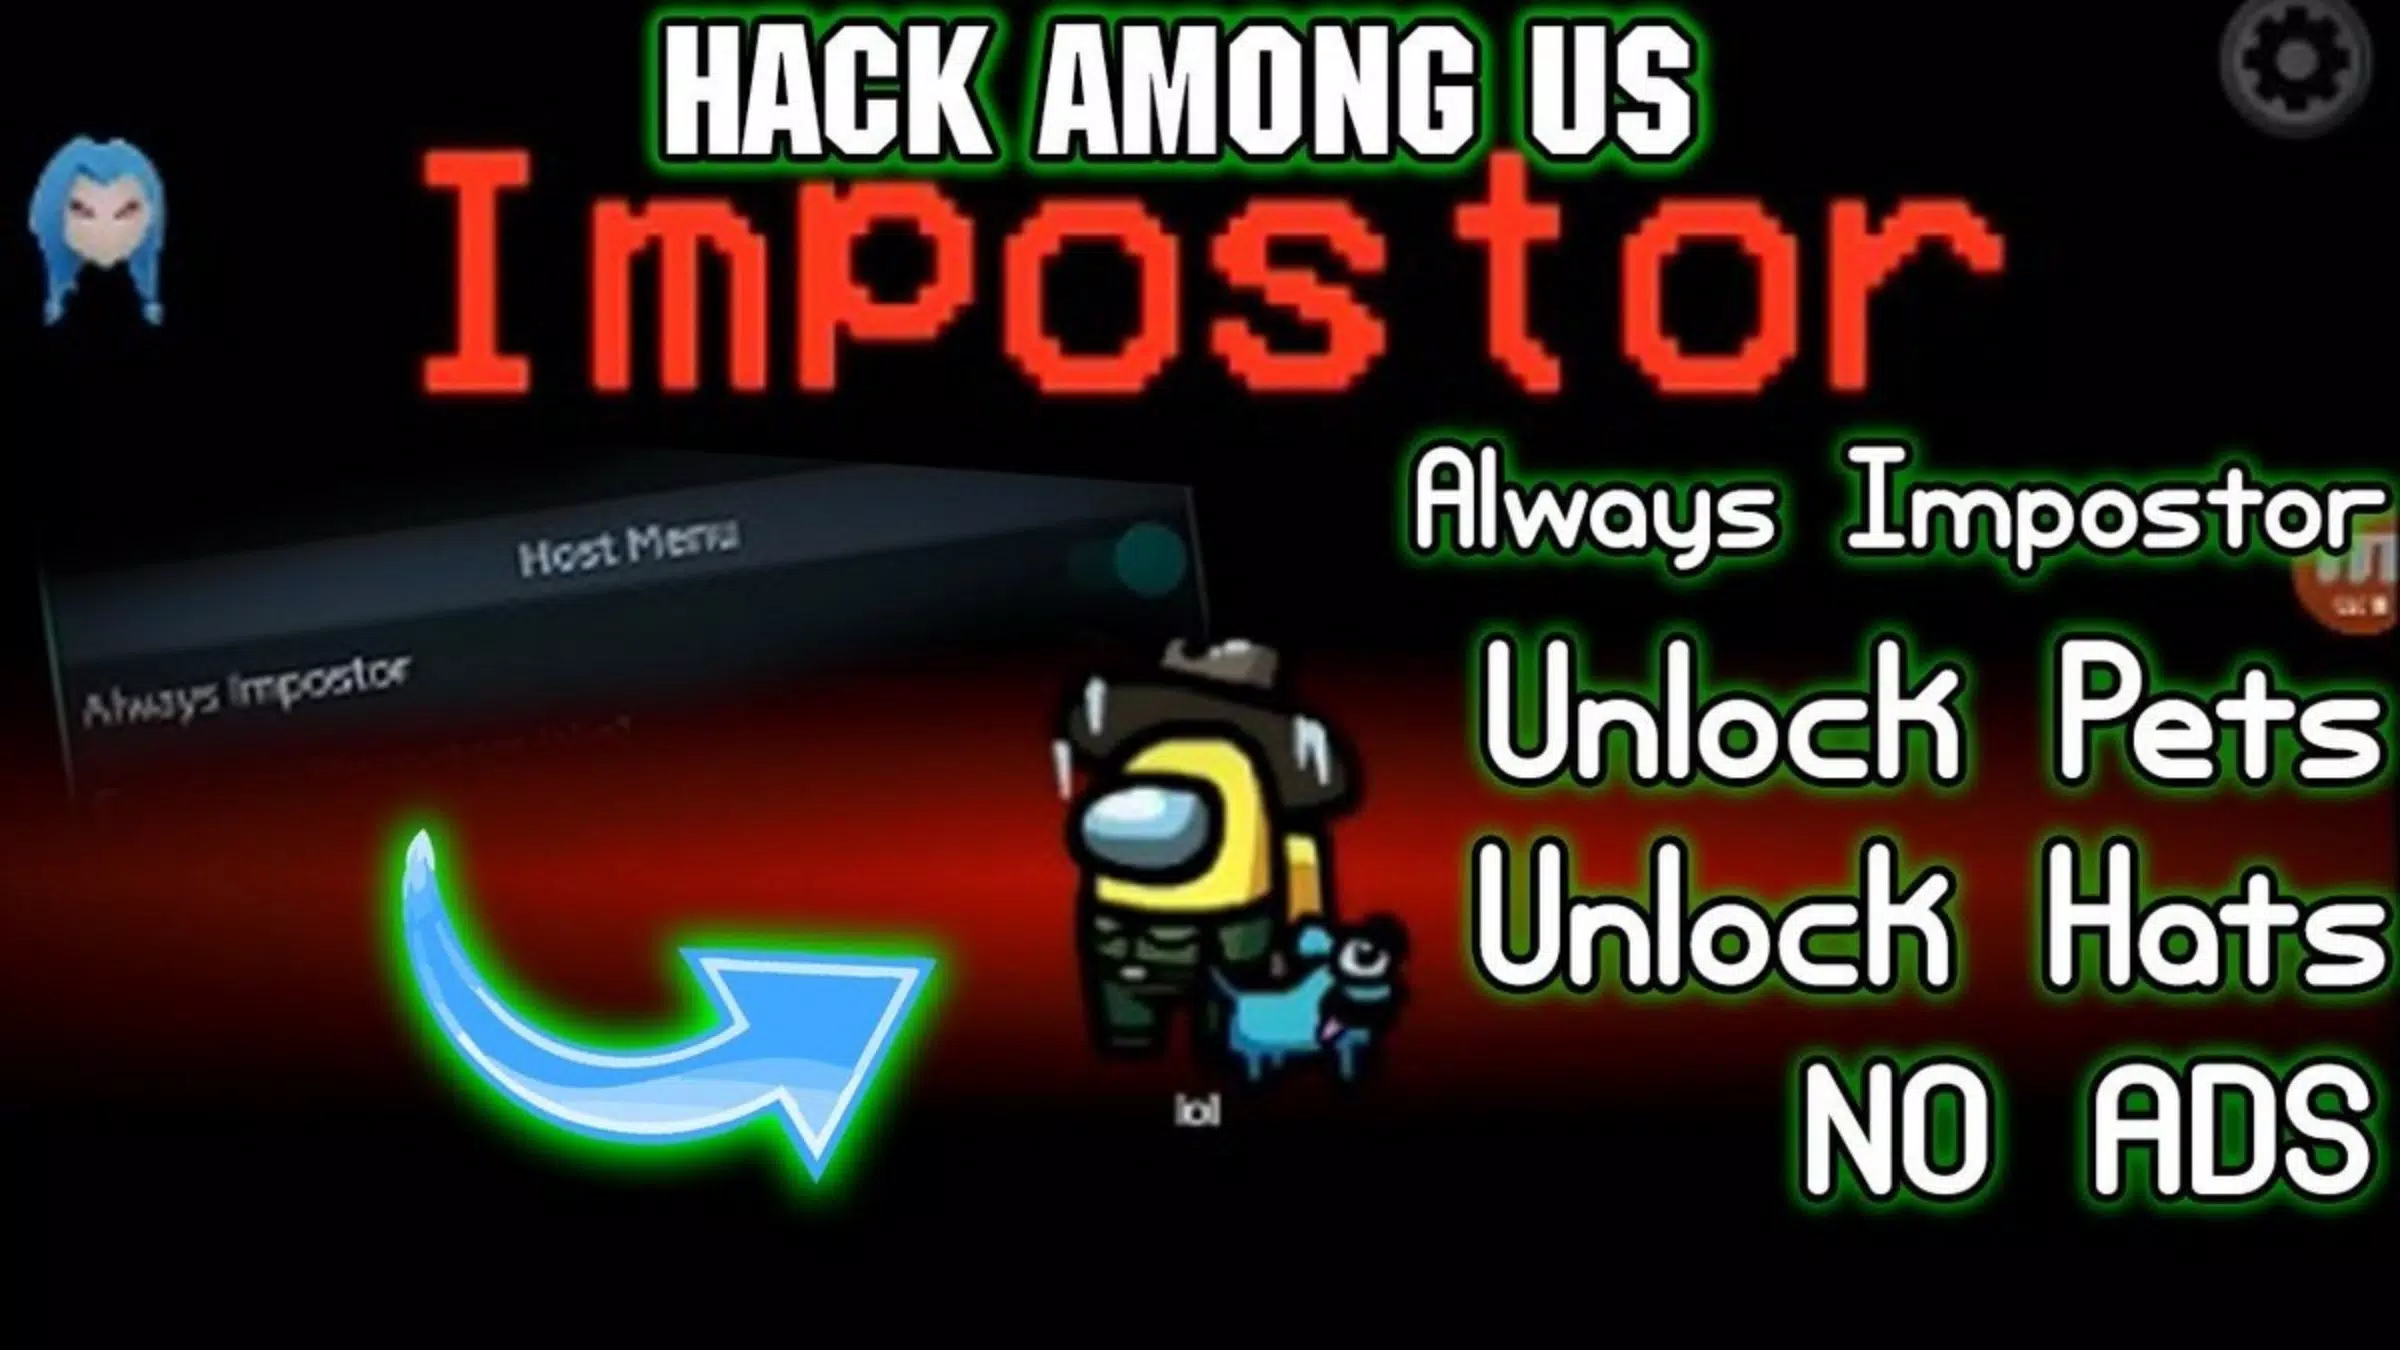 Always Imposter Mod apk download - Always Imposter MOD apk free for Android.